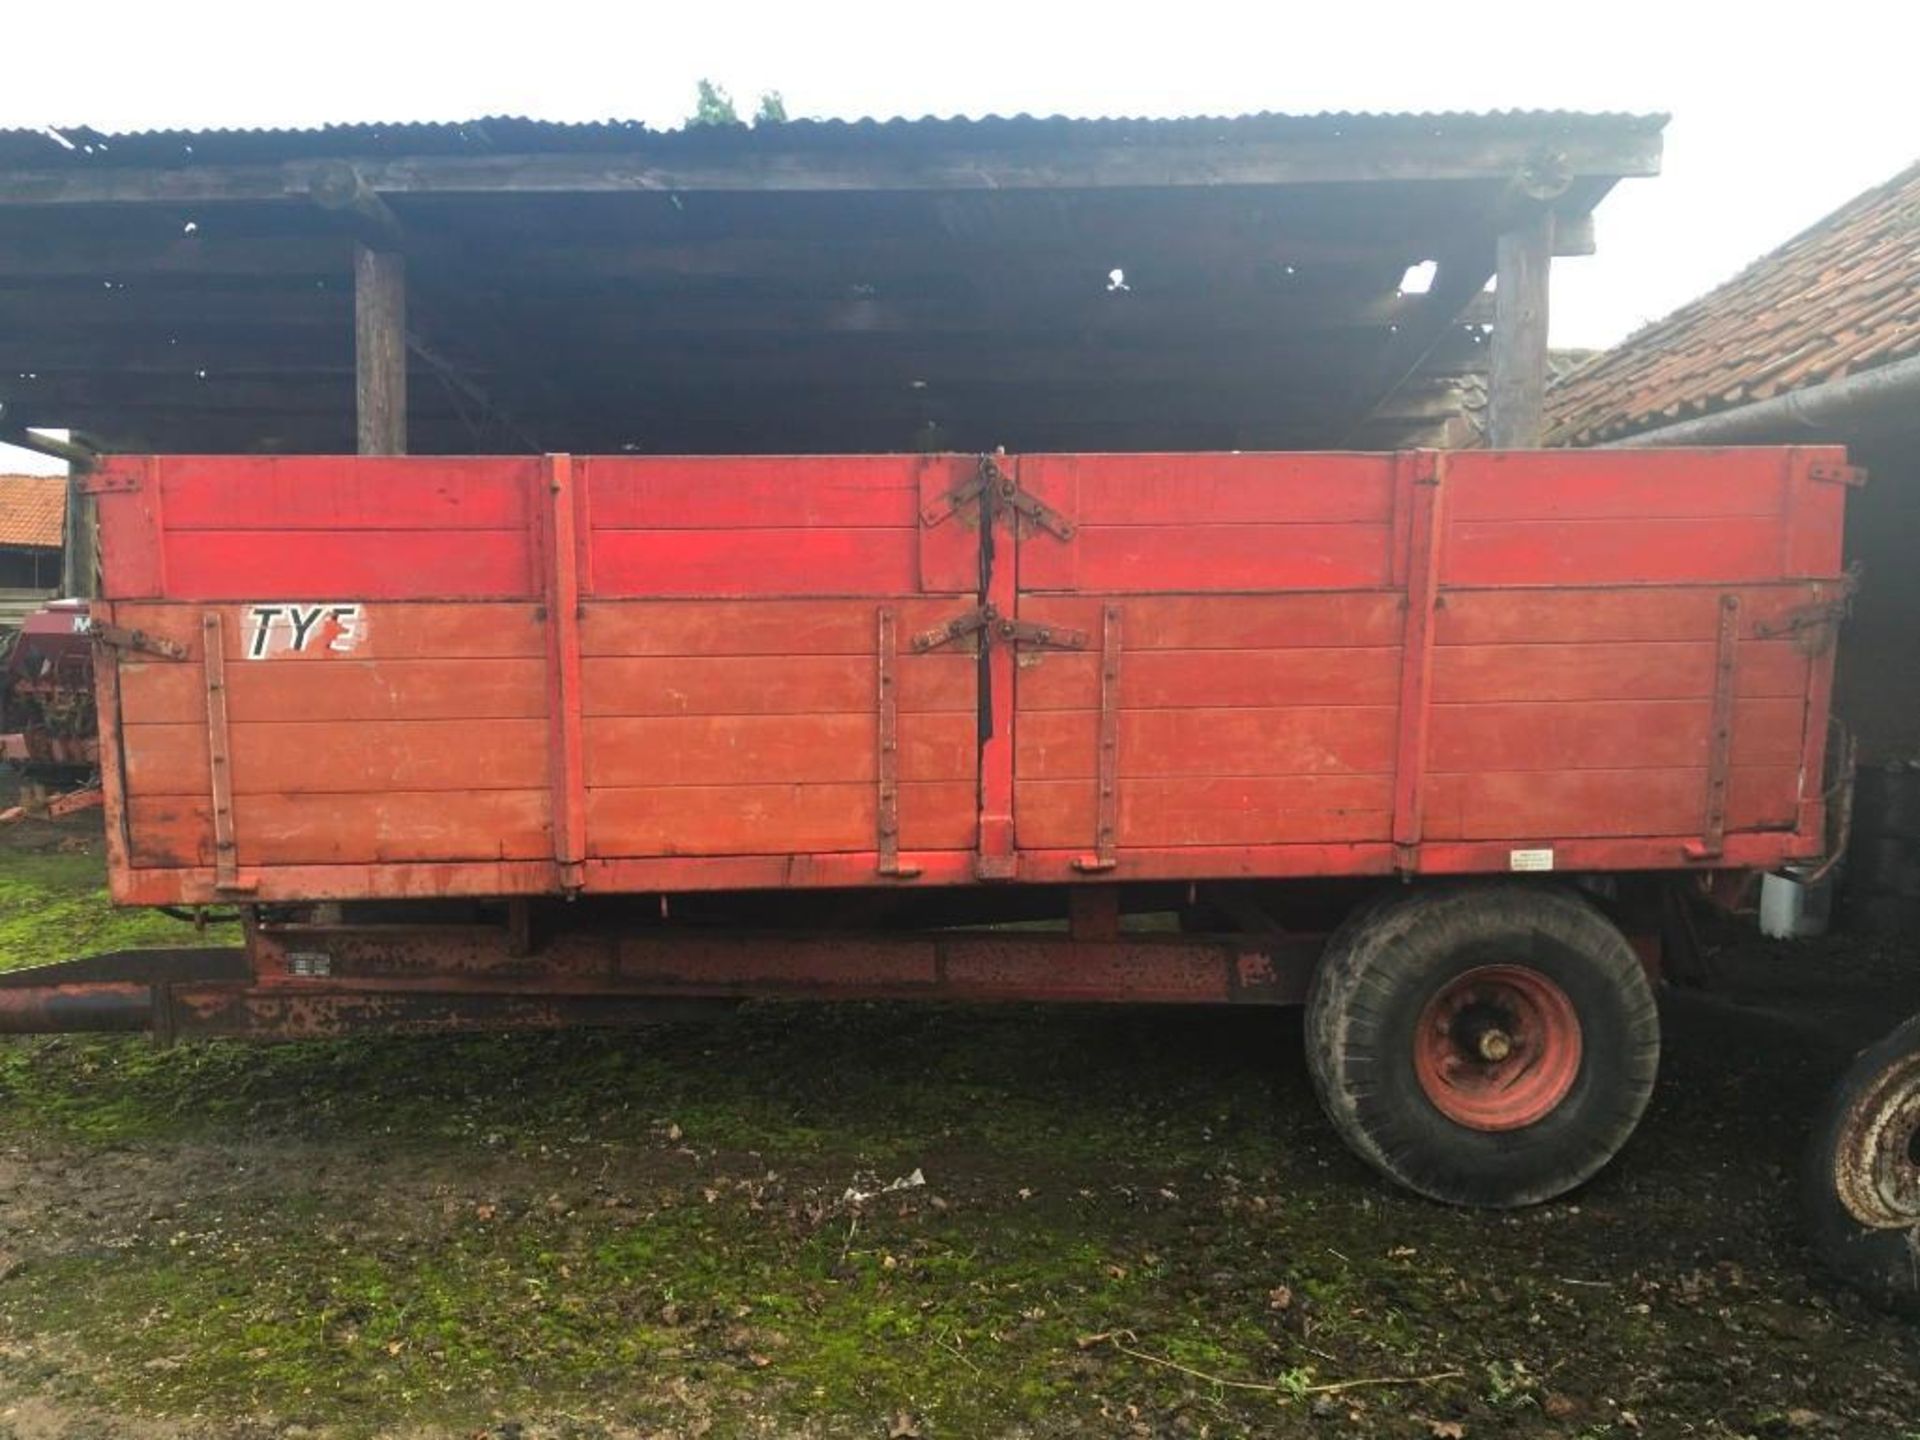 1975 Tye 6T single axle grain trailer with extensions. On the farm from new. Serial No: 6782 - Image 9 of 12